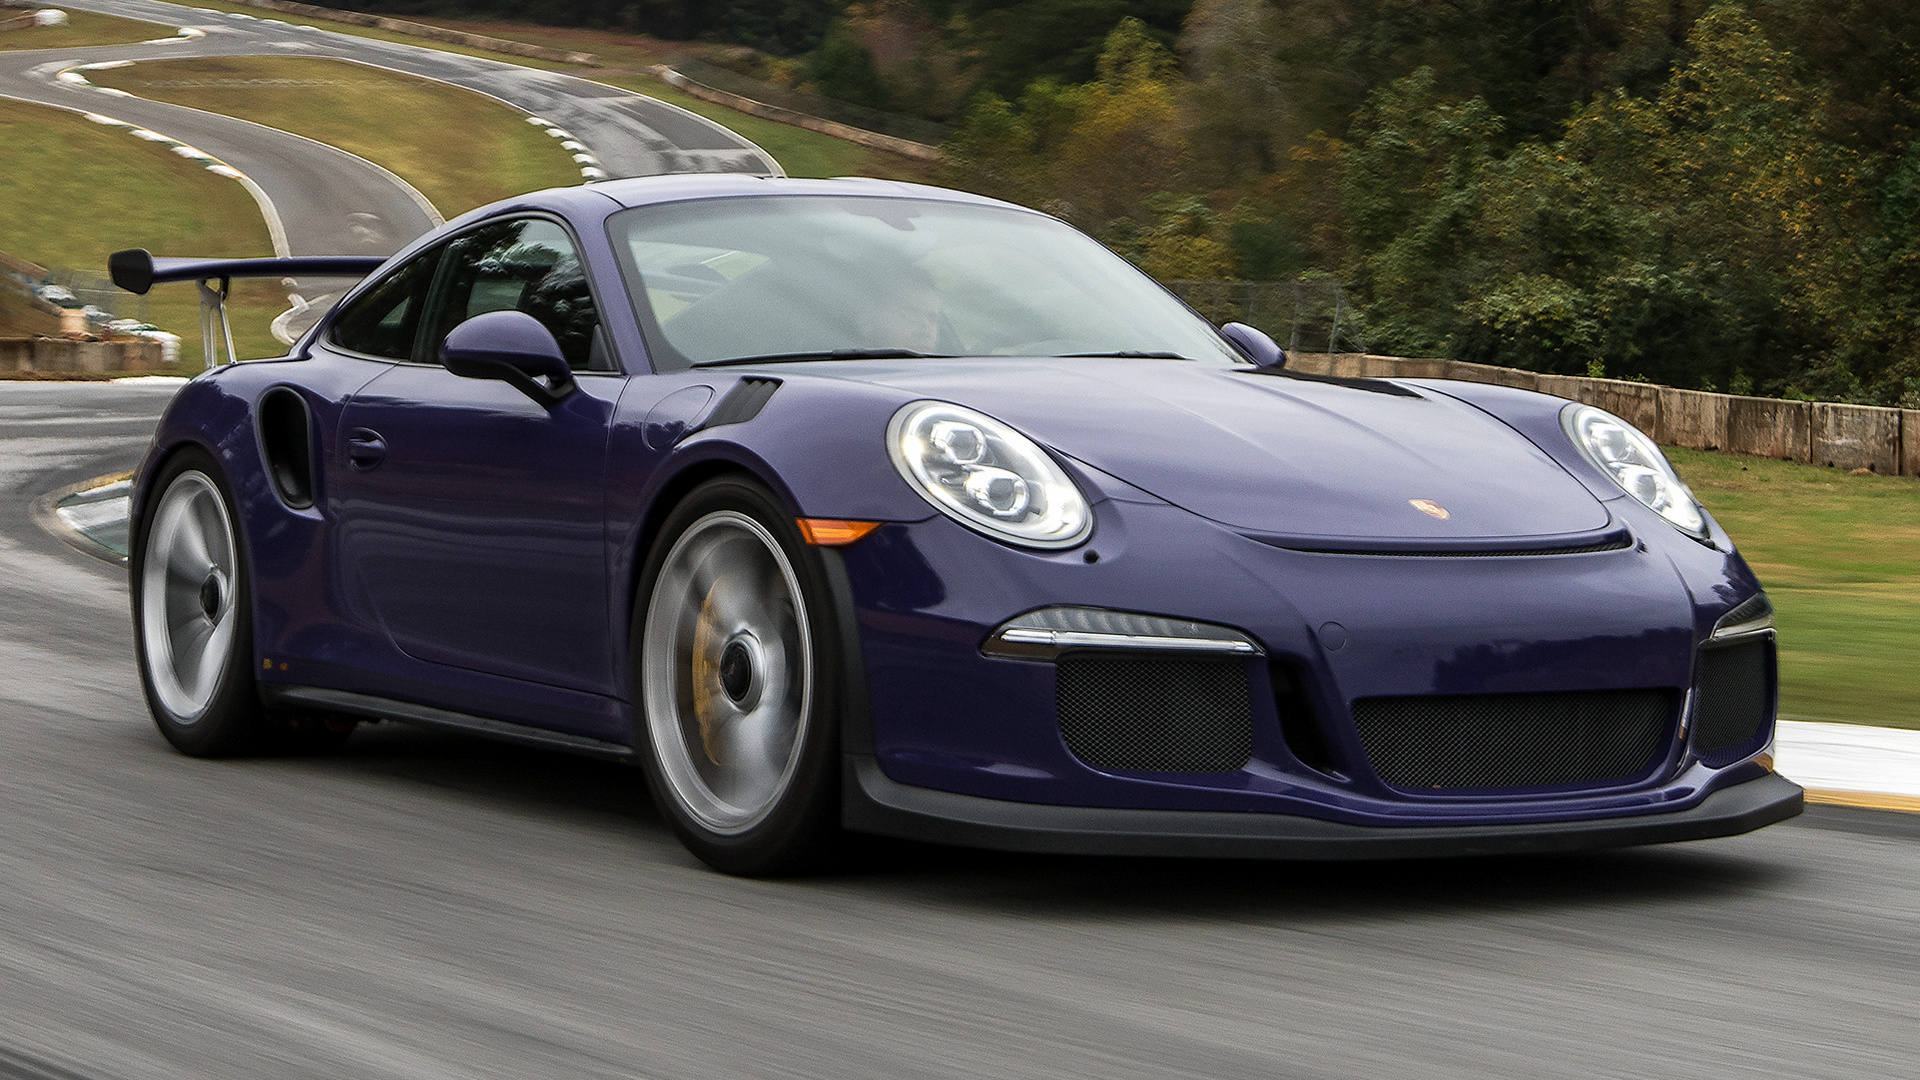 2016 Porsche 911 GT3 RS (US) Wallpapers and HD Images